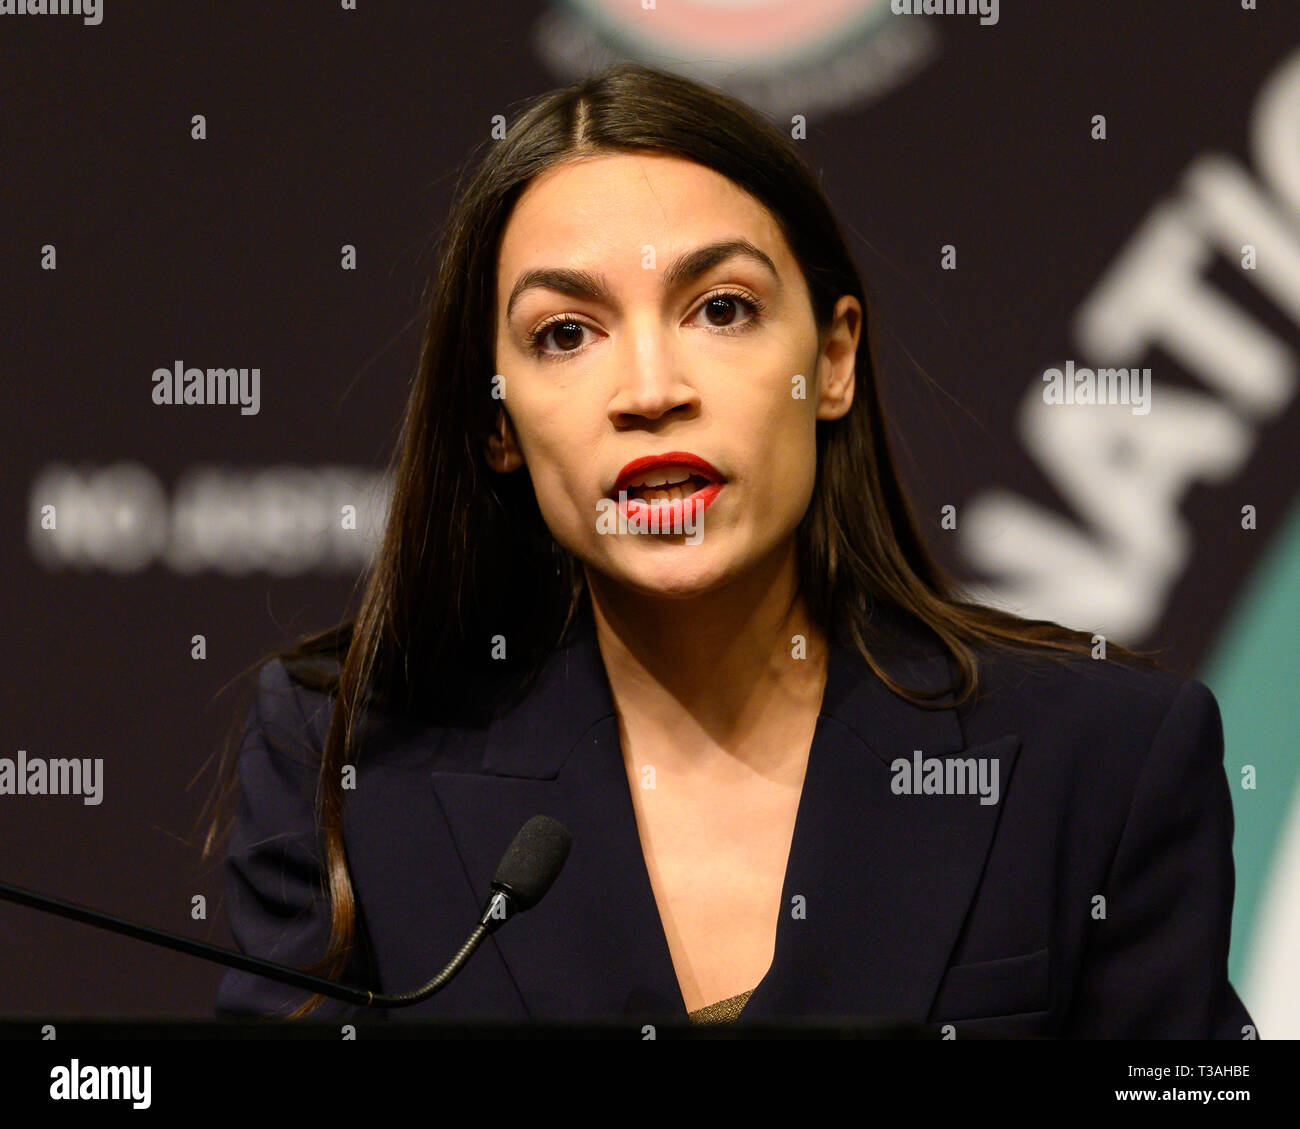 U.S. Representative Alexandria Ocasio-Cortez (D-NY) seen at the National Action Network National (NAN) convention in New York City, NY on April 5, 2019 Stock Photo